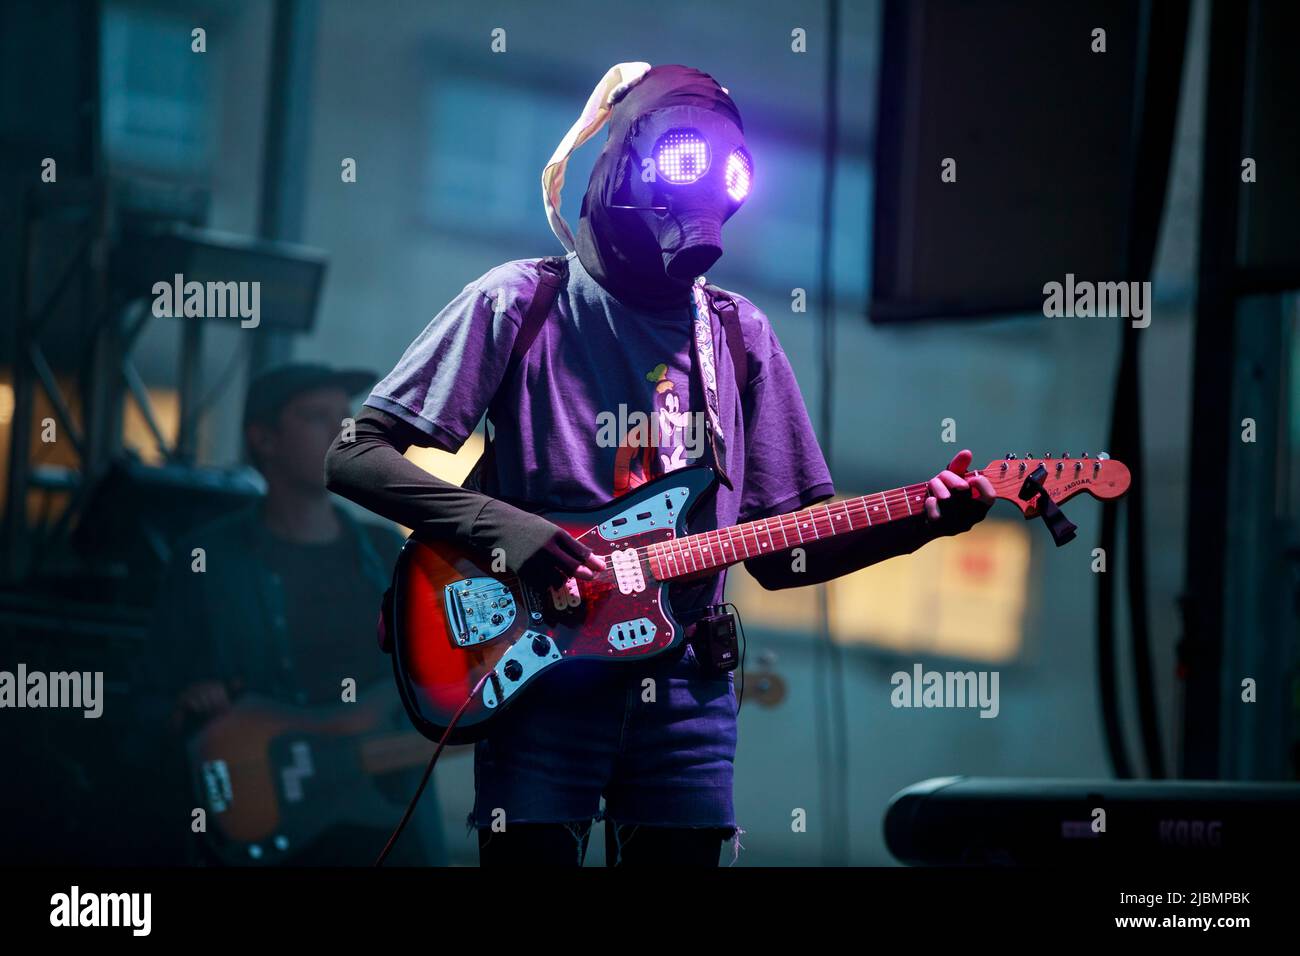 BLOOMINGTON, INDIANA - JUNE 4: Will Toledo of Car Seat Headrest wears a mask while performing during the Granfalloon festival on June 4, 2022, in Bloomington, Indiana. ÒGranfalloon is an annual festival of arts, music, and scholarship inspired by Hoosier author Kurt Vonnegut,Ó according to the eventÕs webpage. The festival takes place in Bloomington, Indiana. Stock Photo